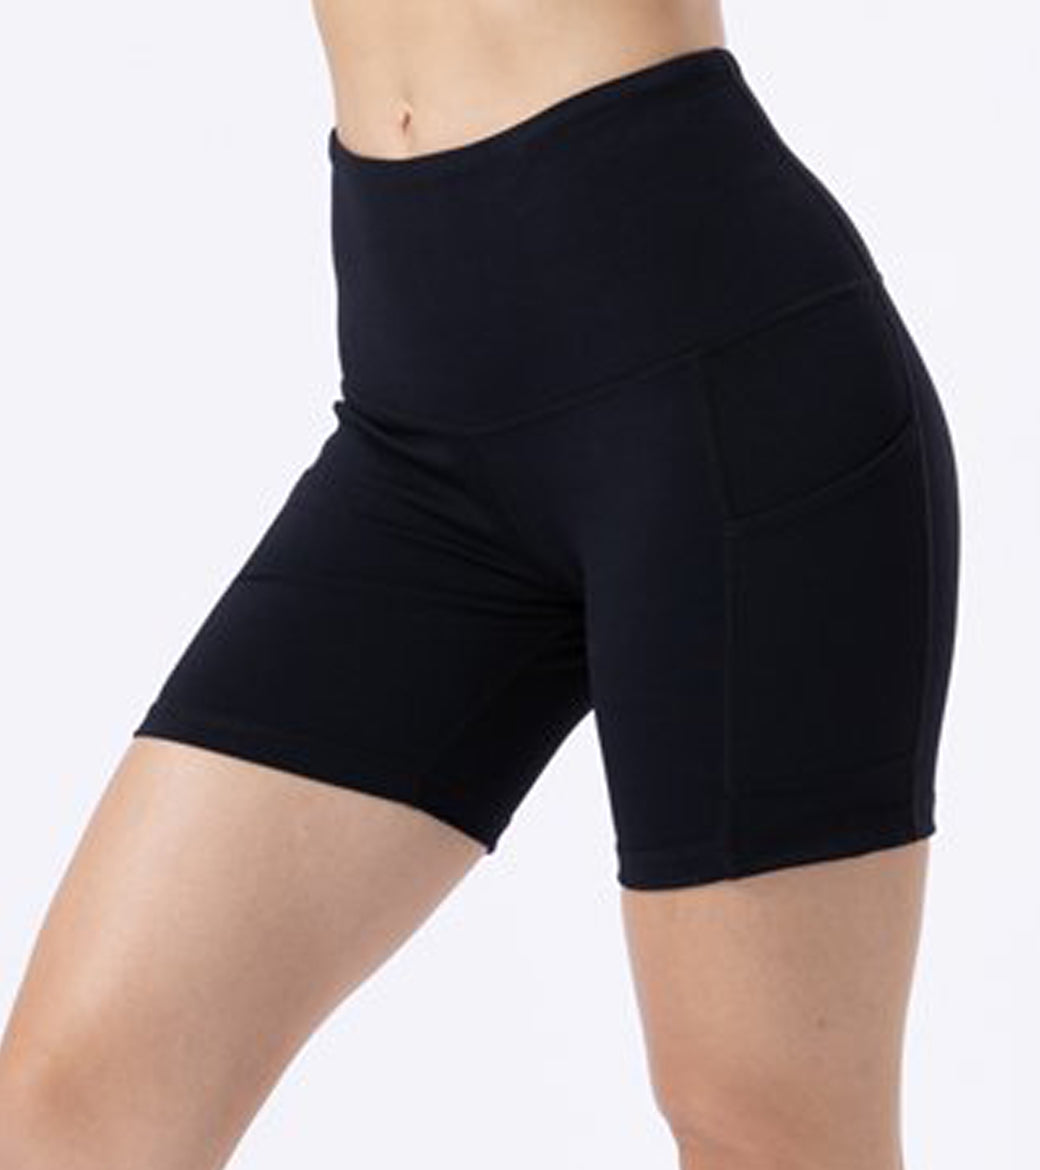 LOVESOFT Black Hight Waist Workout Sports Yoga Shorts with Side Pocketed